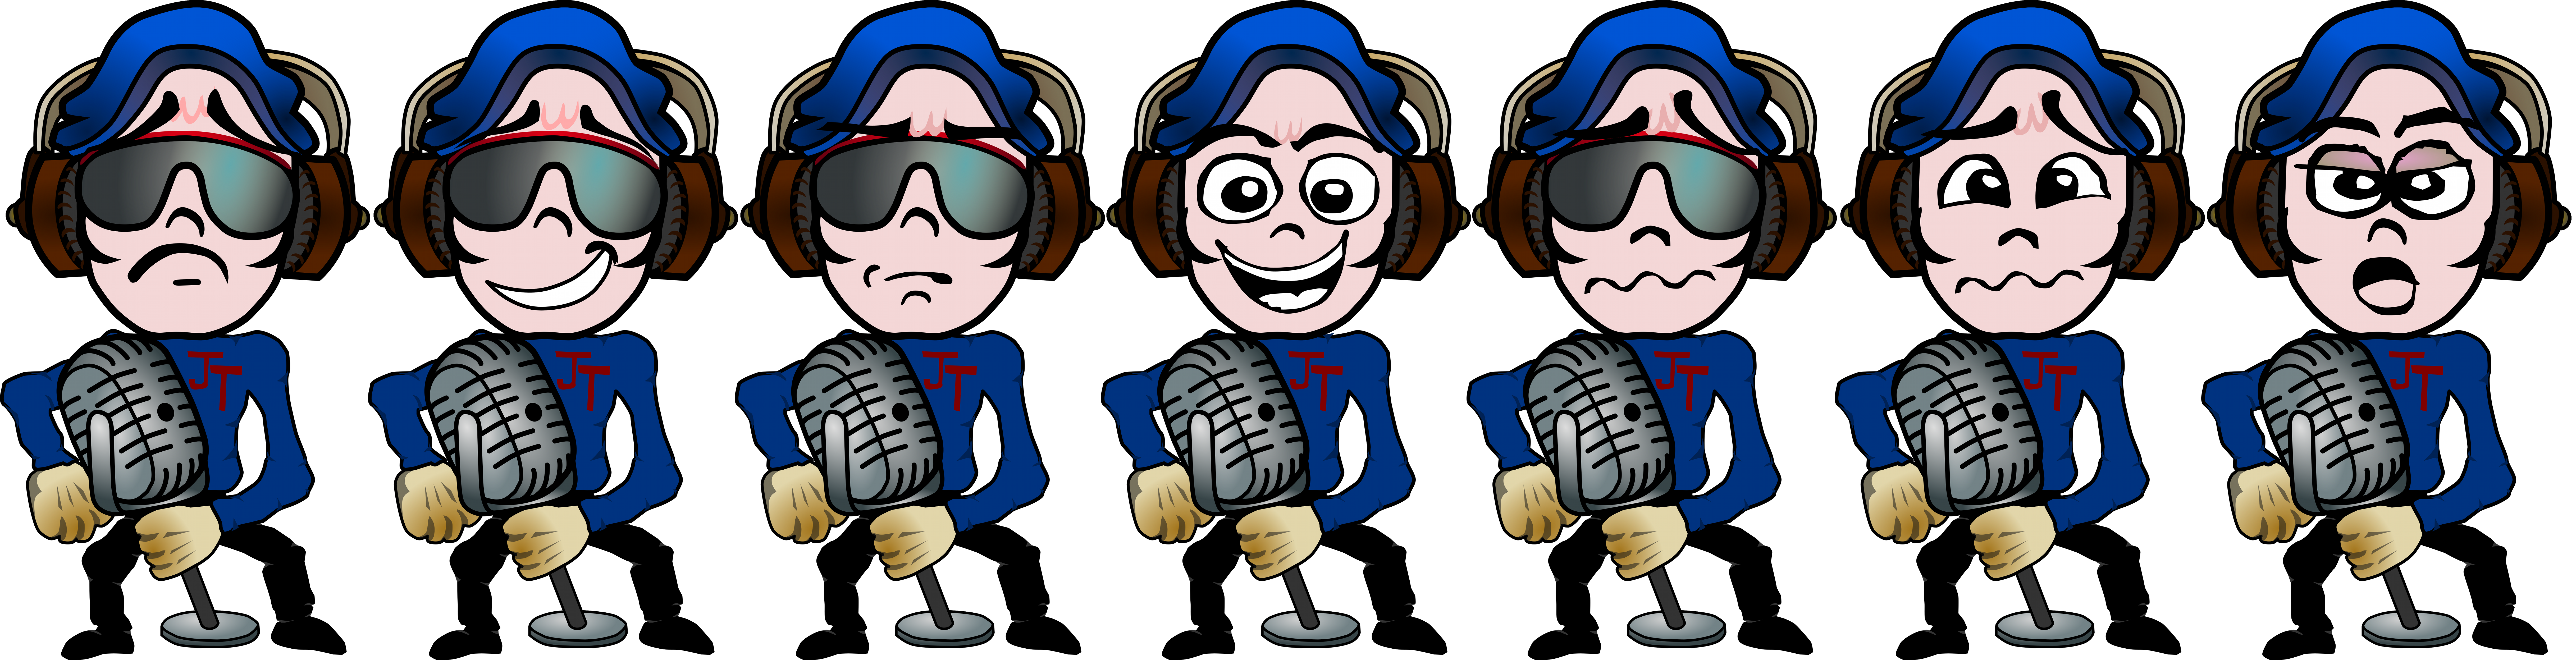 Shirt and Microphone Illustration: various expressions - The Justin Thomas Show 